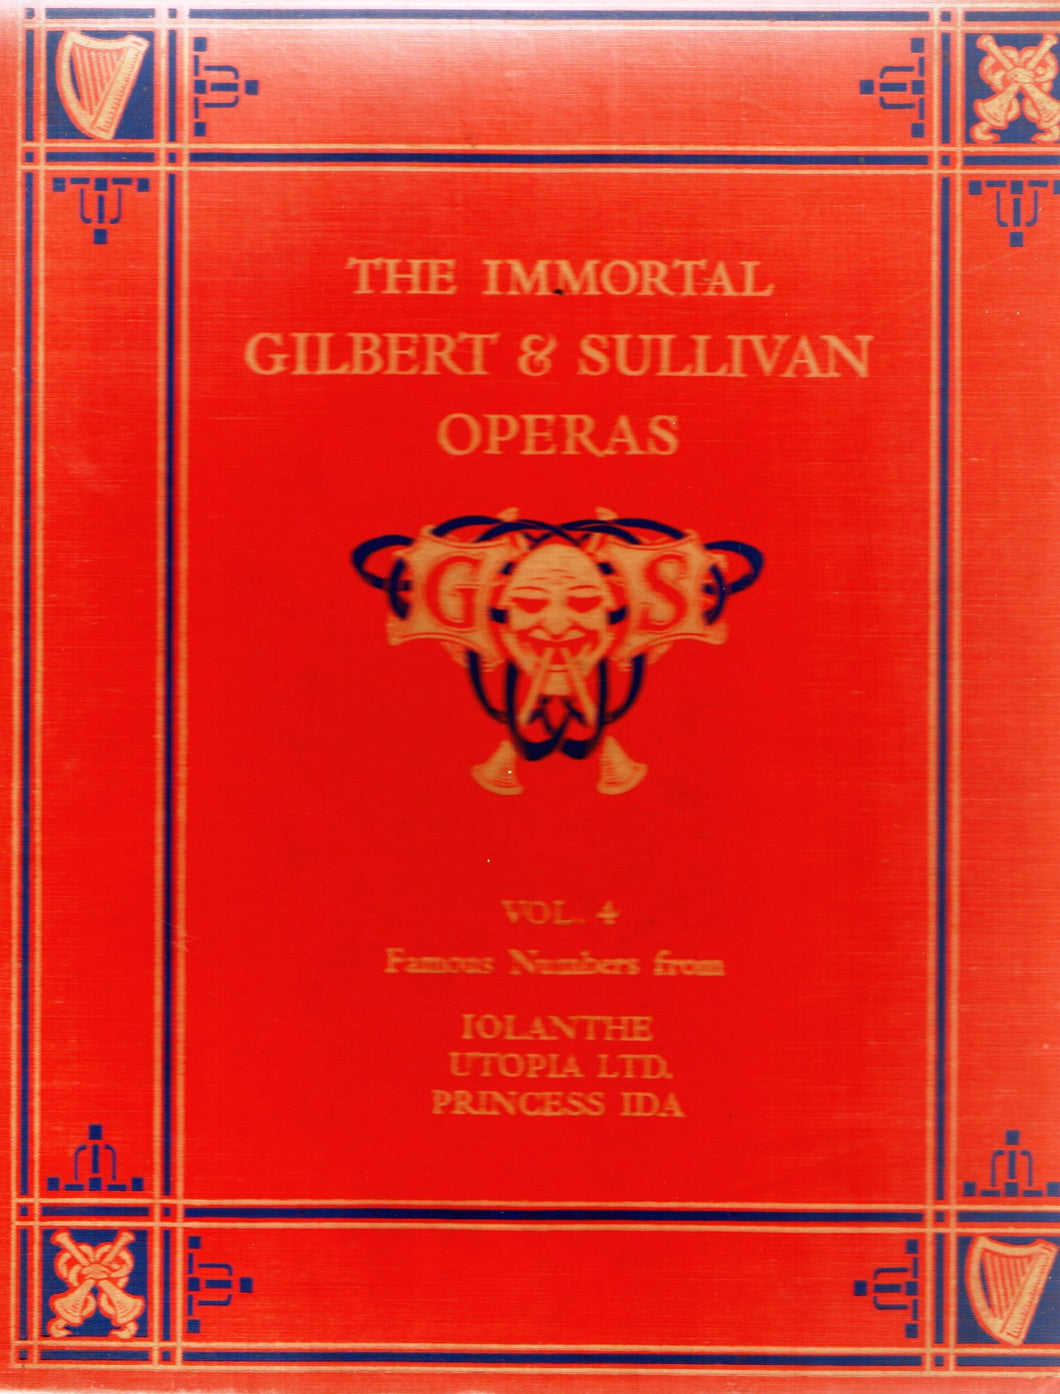 THE IMMORTAL OPERAS OF GILBERT AND SULLIVAN VOLUME 4, The Stories of the Plays and the Words and Music of Famous Numbers from each Opera, Iolanthe, Utopia Limited, Princess Ida, [Hardcover] W.S. GILBERT AND ARTHUR SULLIVAN